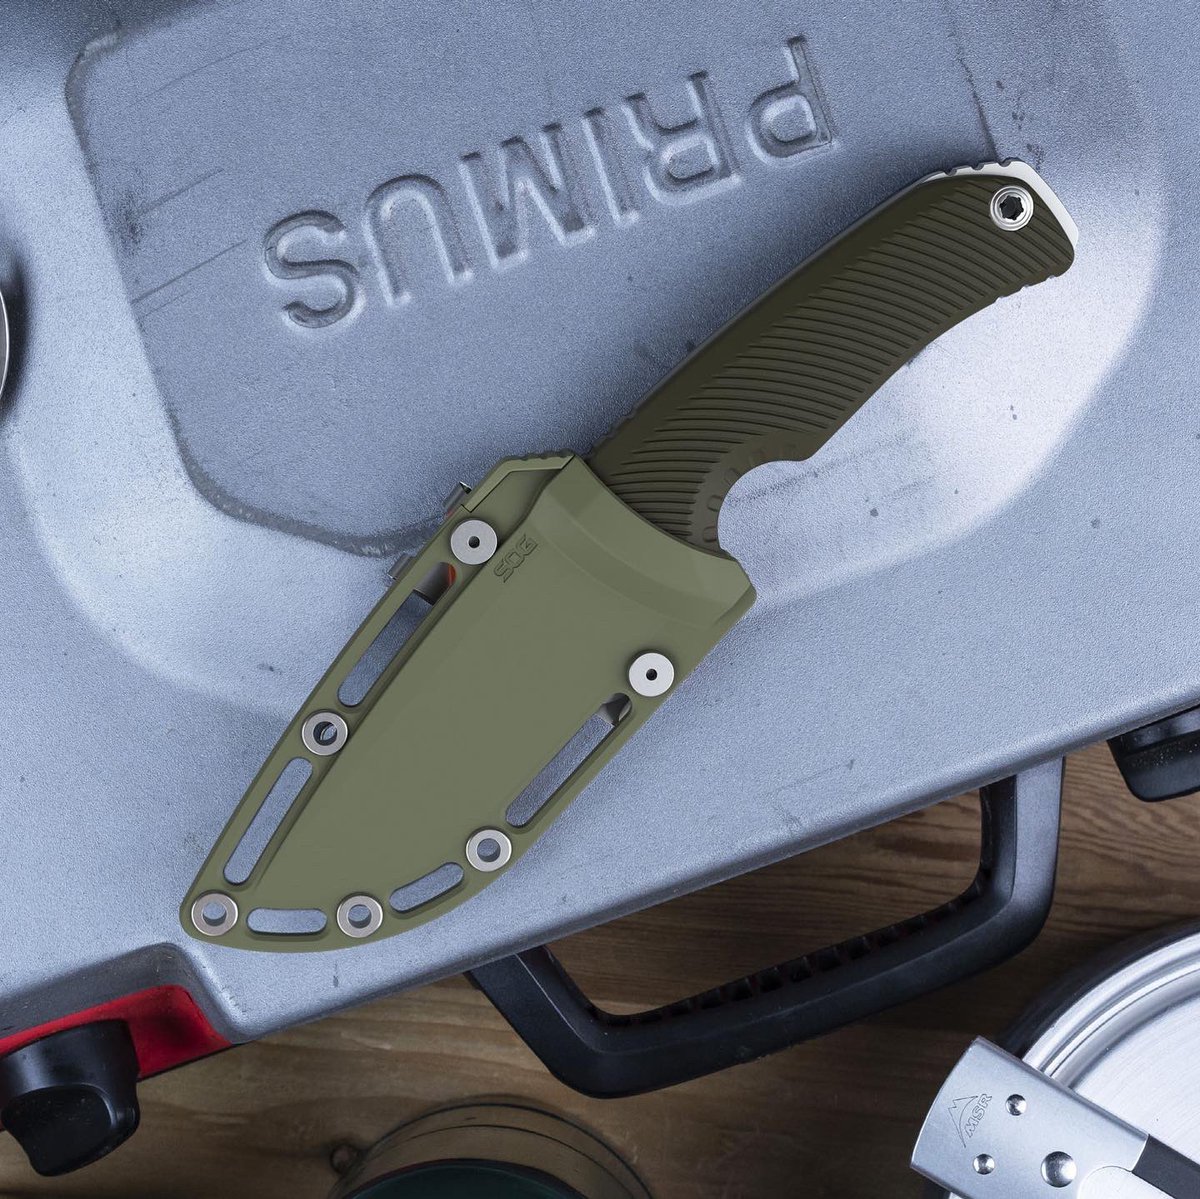 SOGKnives tweet picture